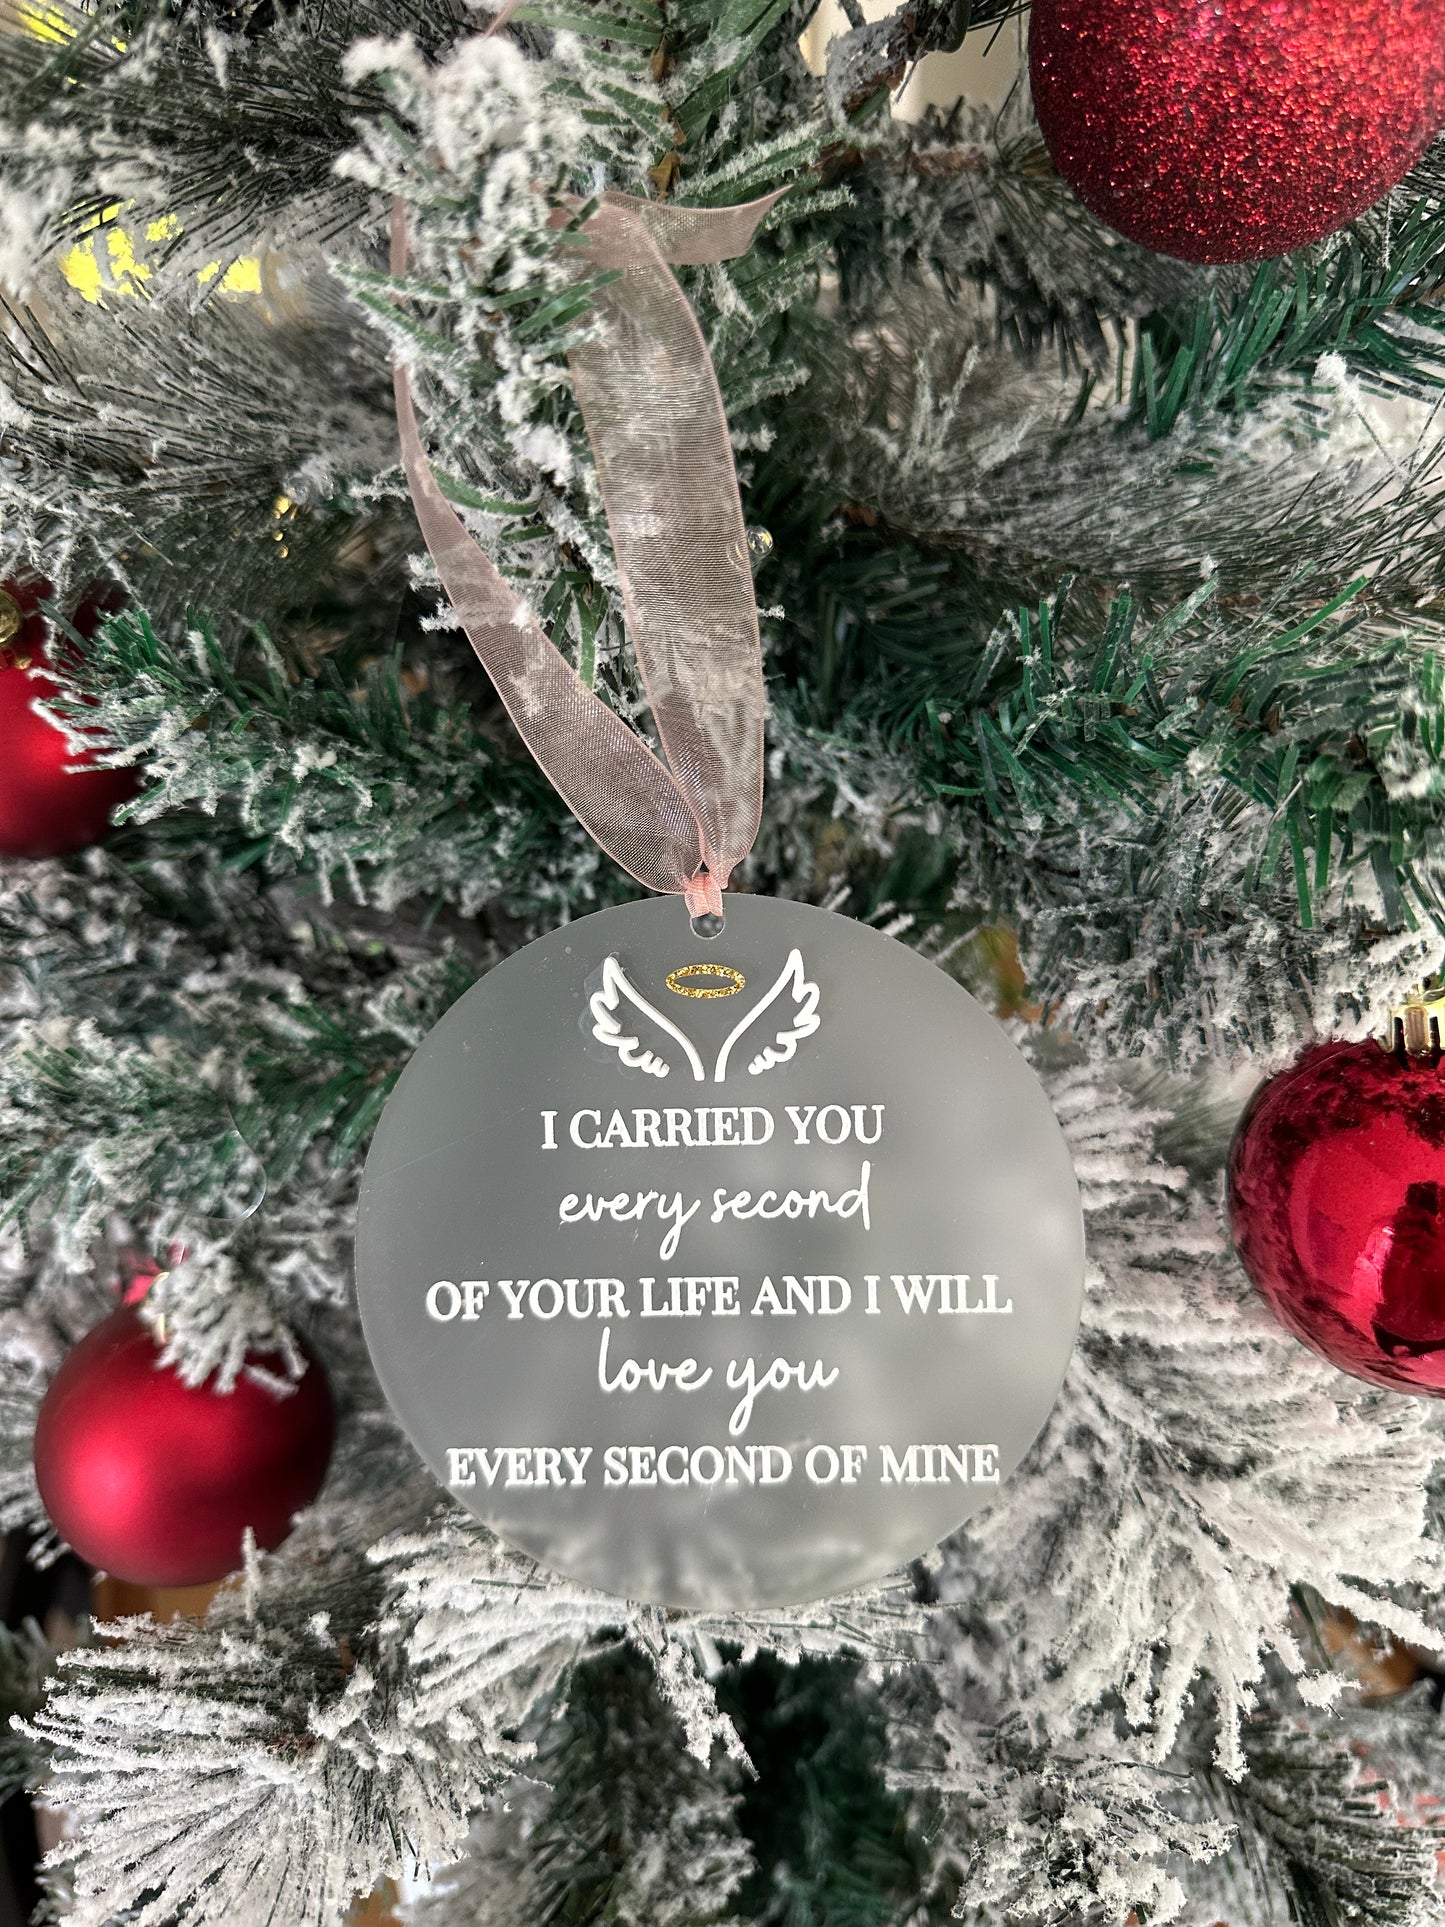 I carried you ever second baby angel ornament